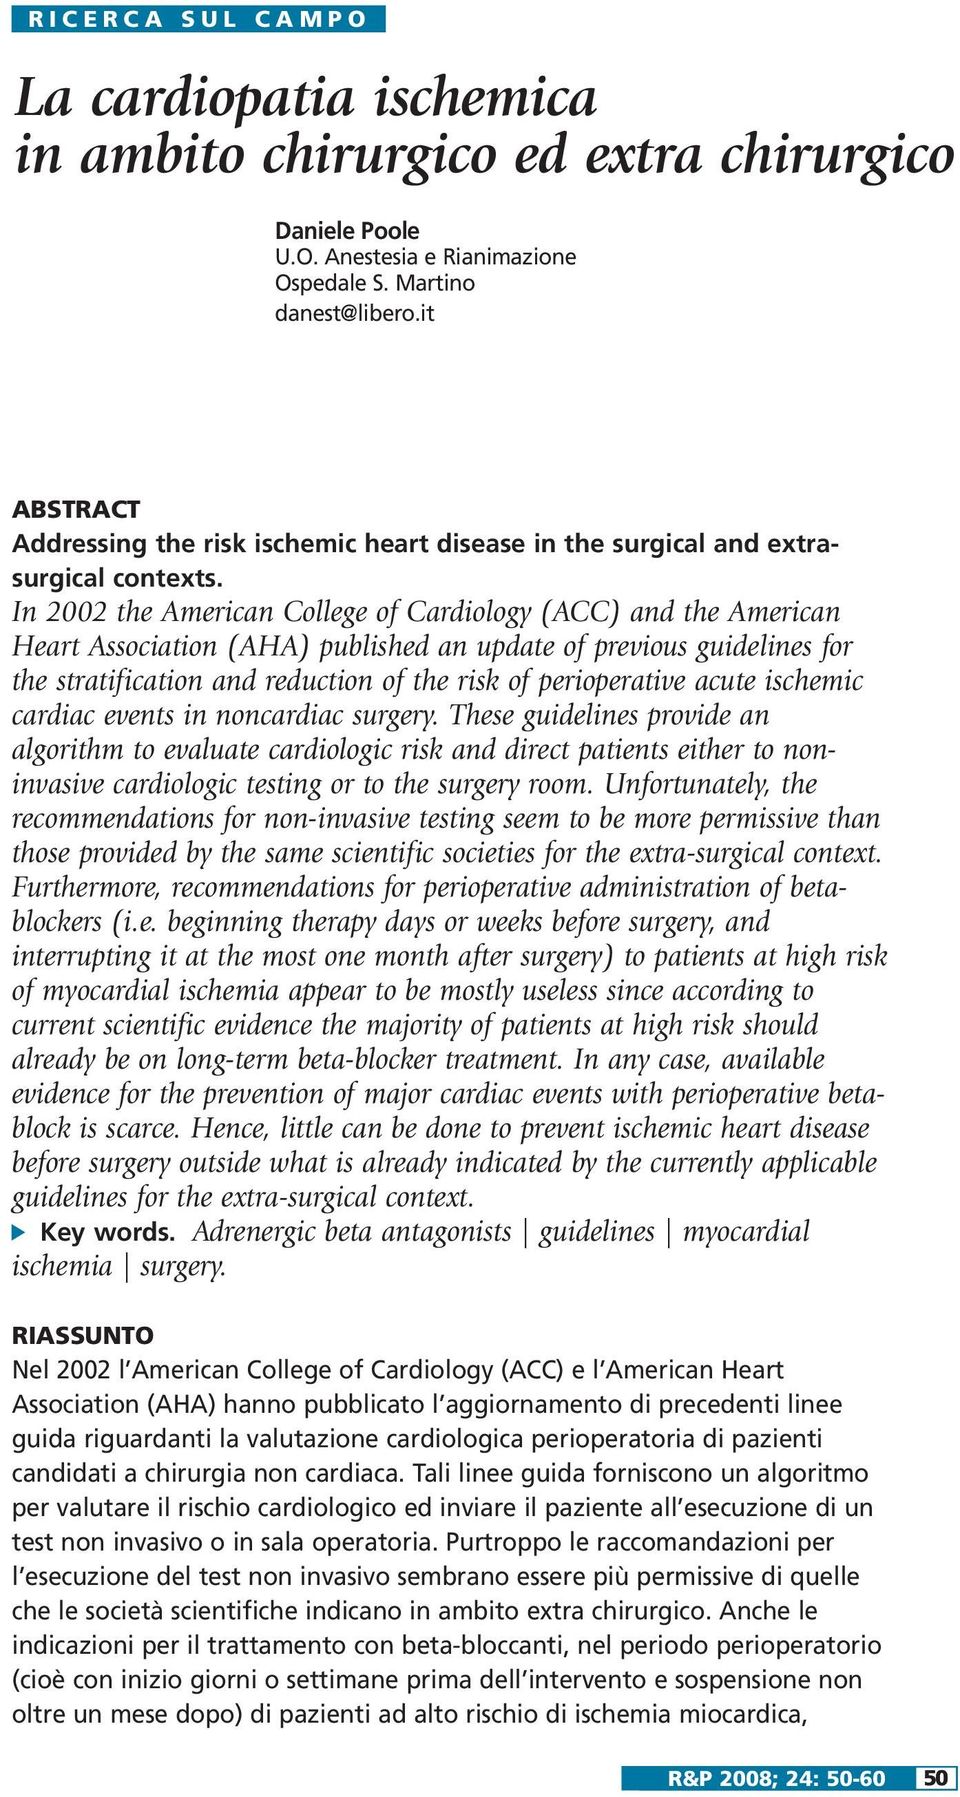 In 2002 the American College of Cardiology (ACC) and the American Heart Association (AHA) published an update of previous guidelines for the stratification and reduction of the risk of perioperative